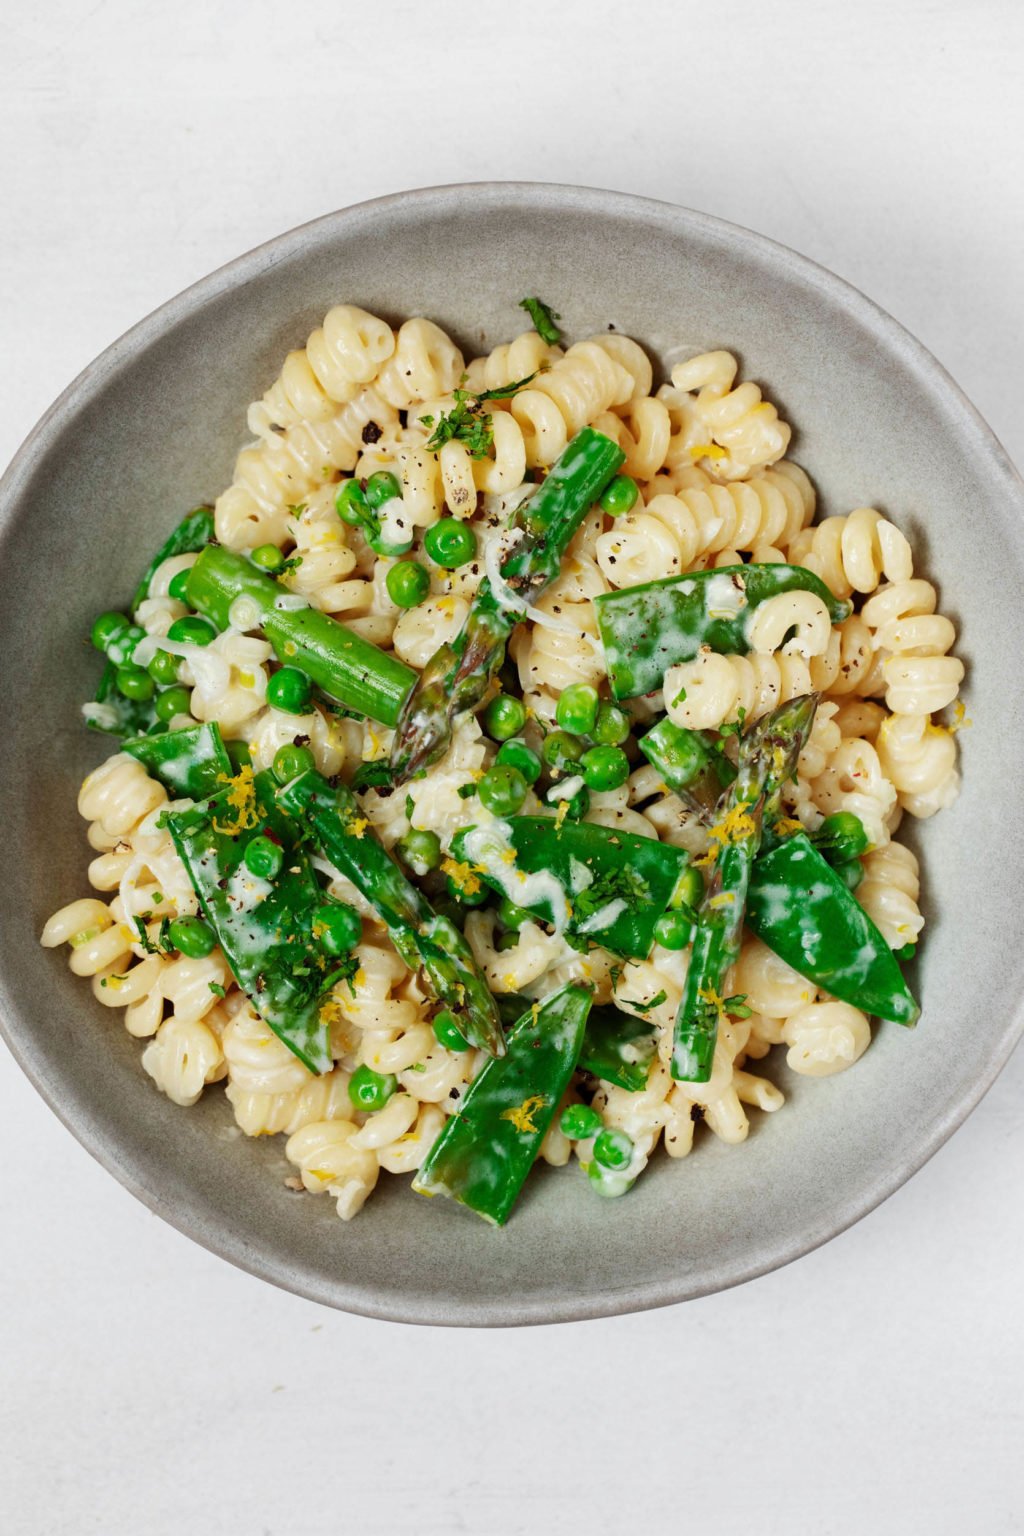 A gray and white ceramic bowl serves a vegan spring pasta primavera dish. It's topped with chopped fresh herbs and black pepper and resting on a white surface.